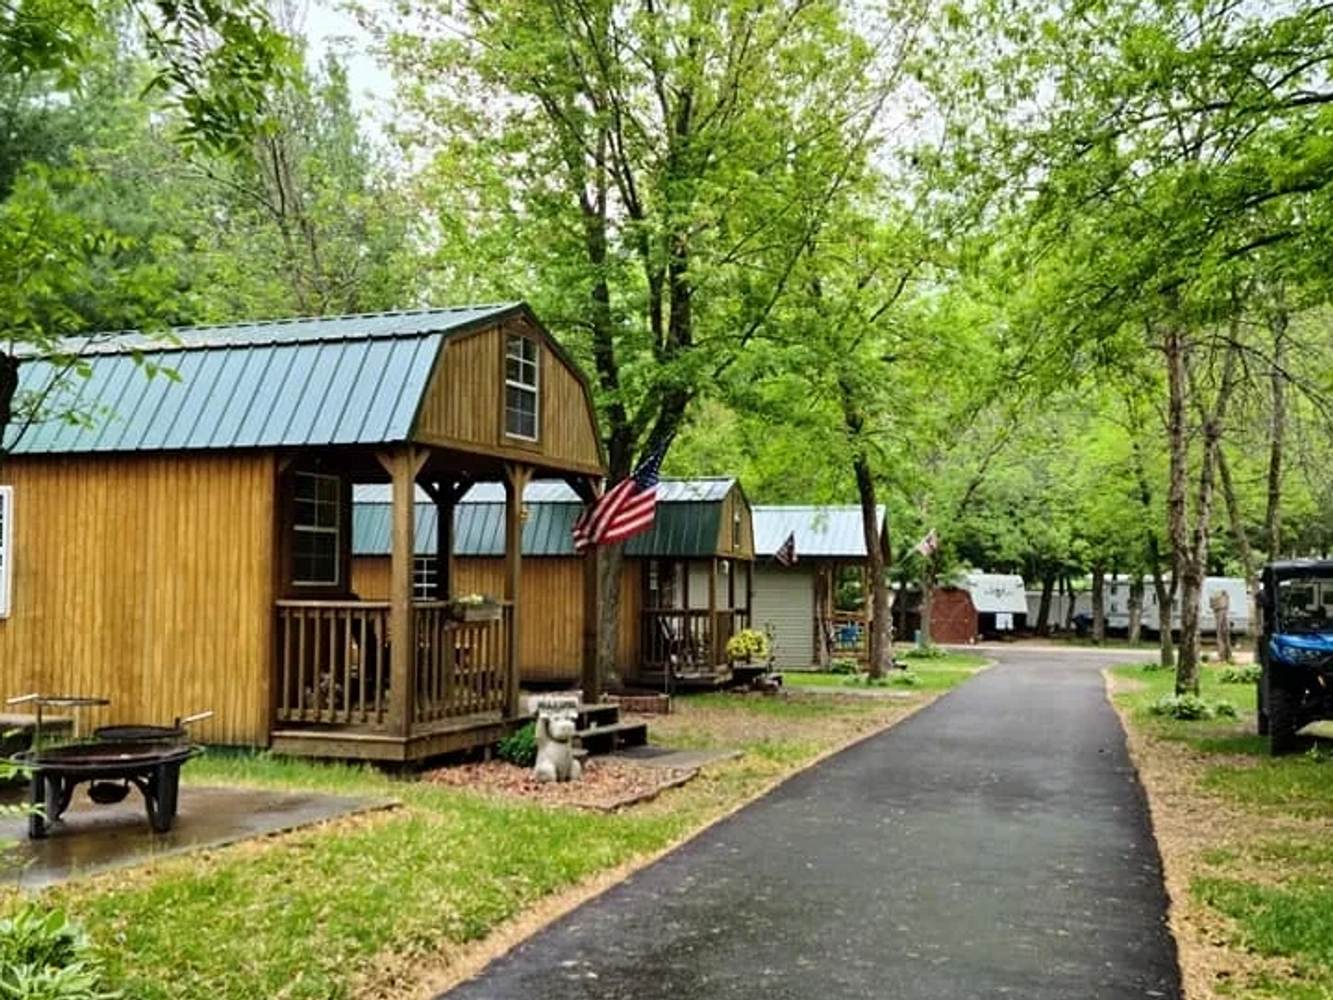 Three cabins on the left of blacktop drive and surrounded by trees.